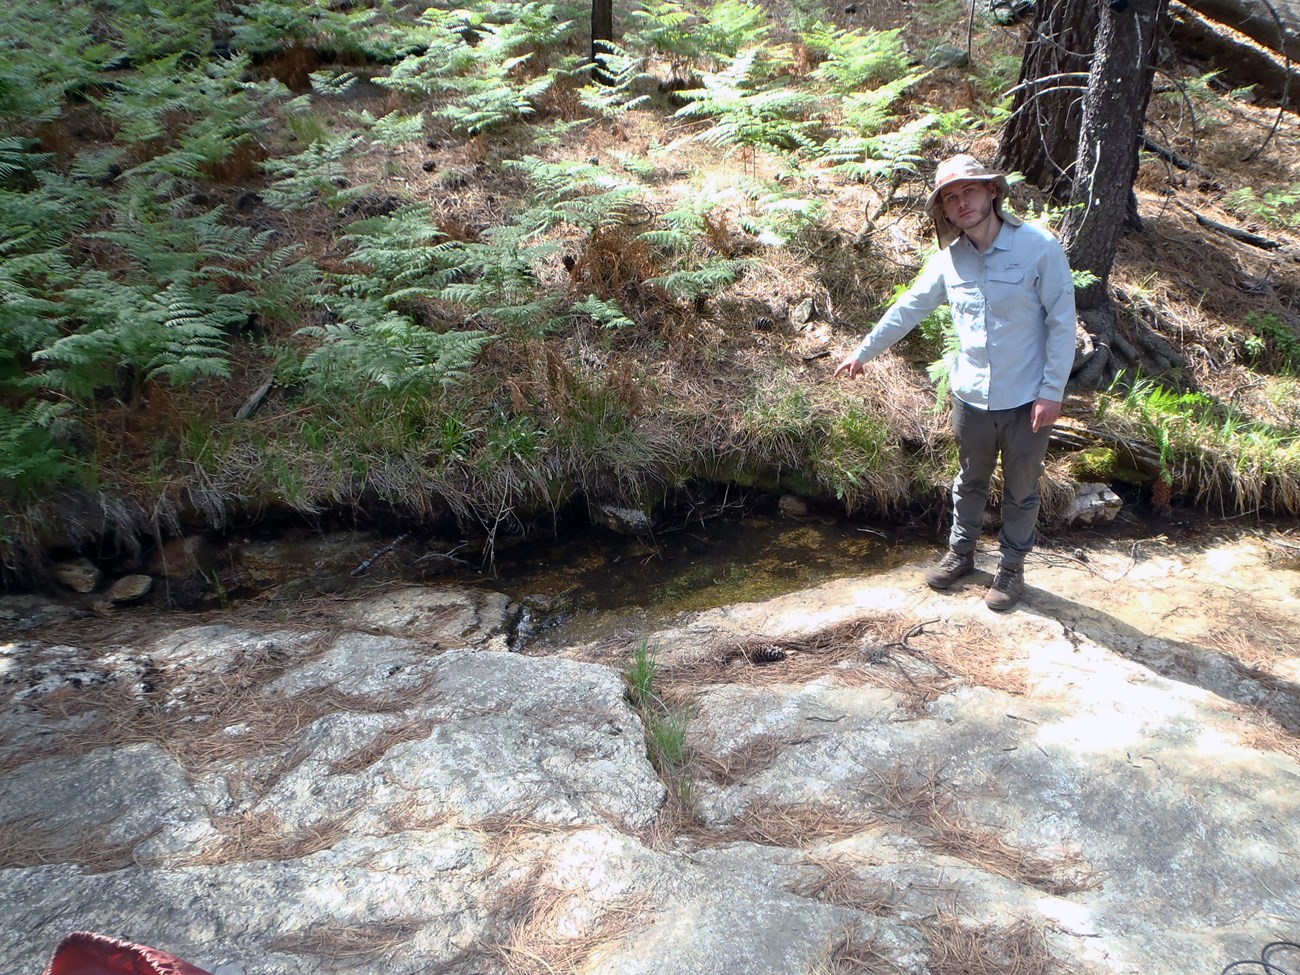 A person pointing at a narrow band of water bounded by a steep bank of ferns and pine needles on one side and bedrock on the other.